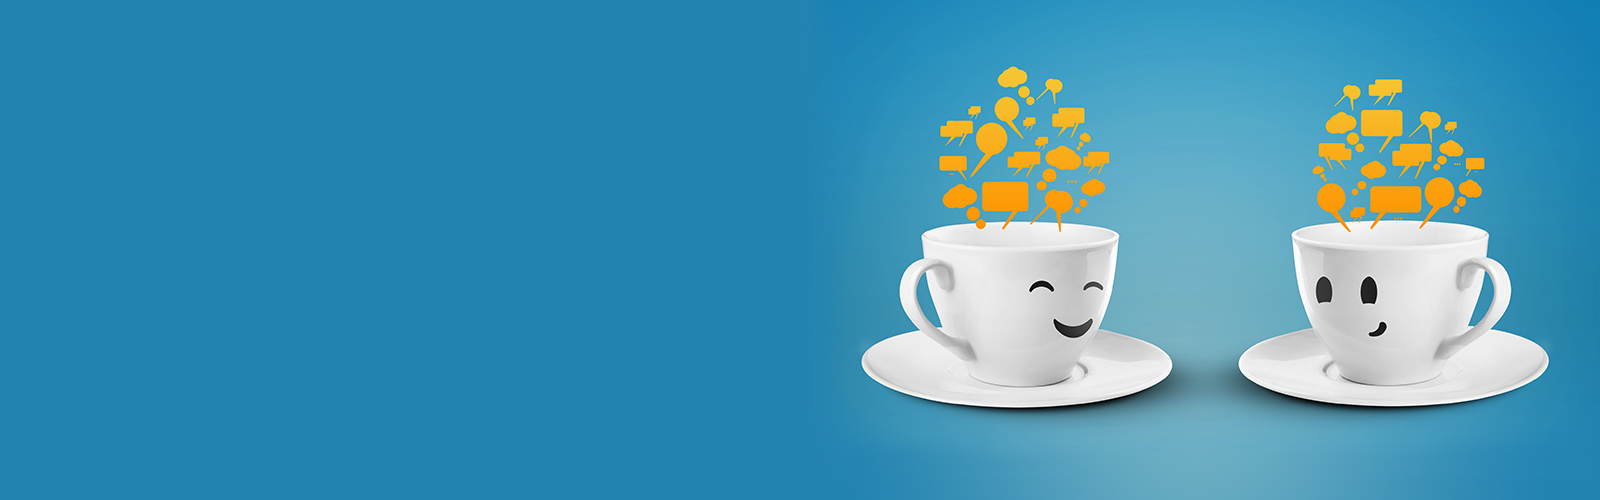 image banner with coffee cups having a conversation